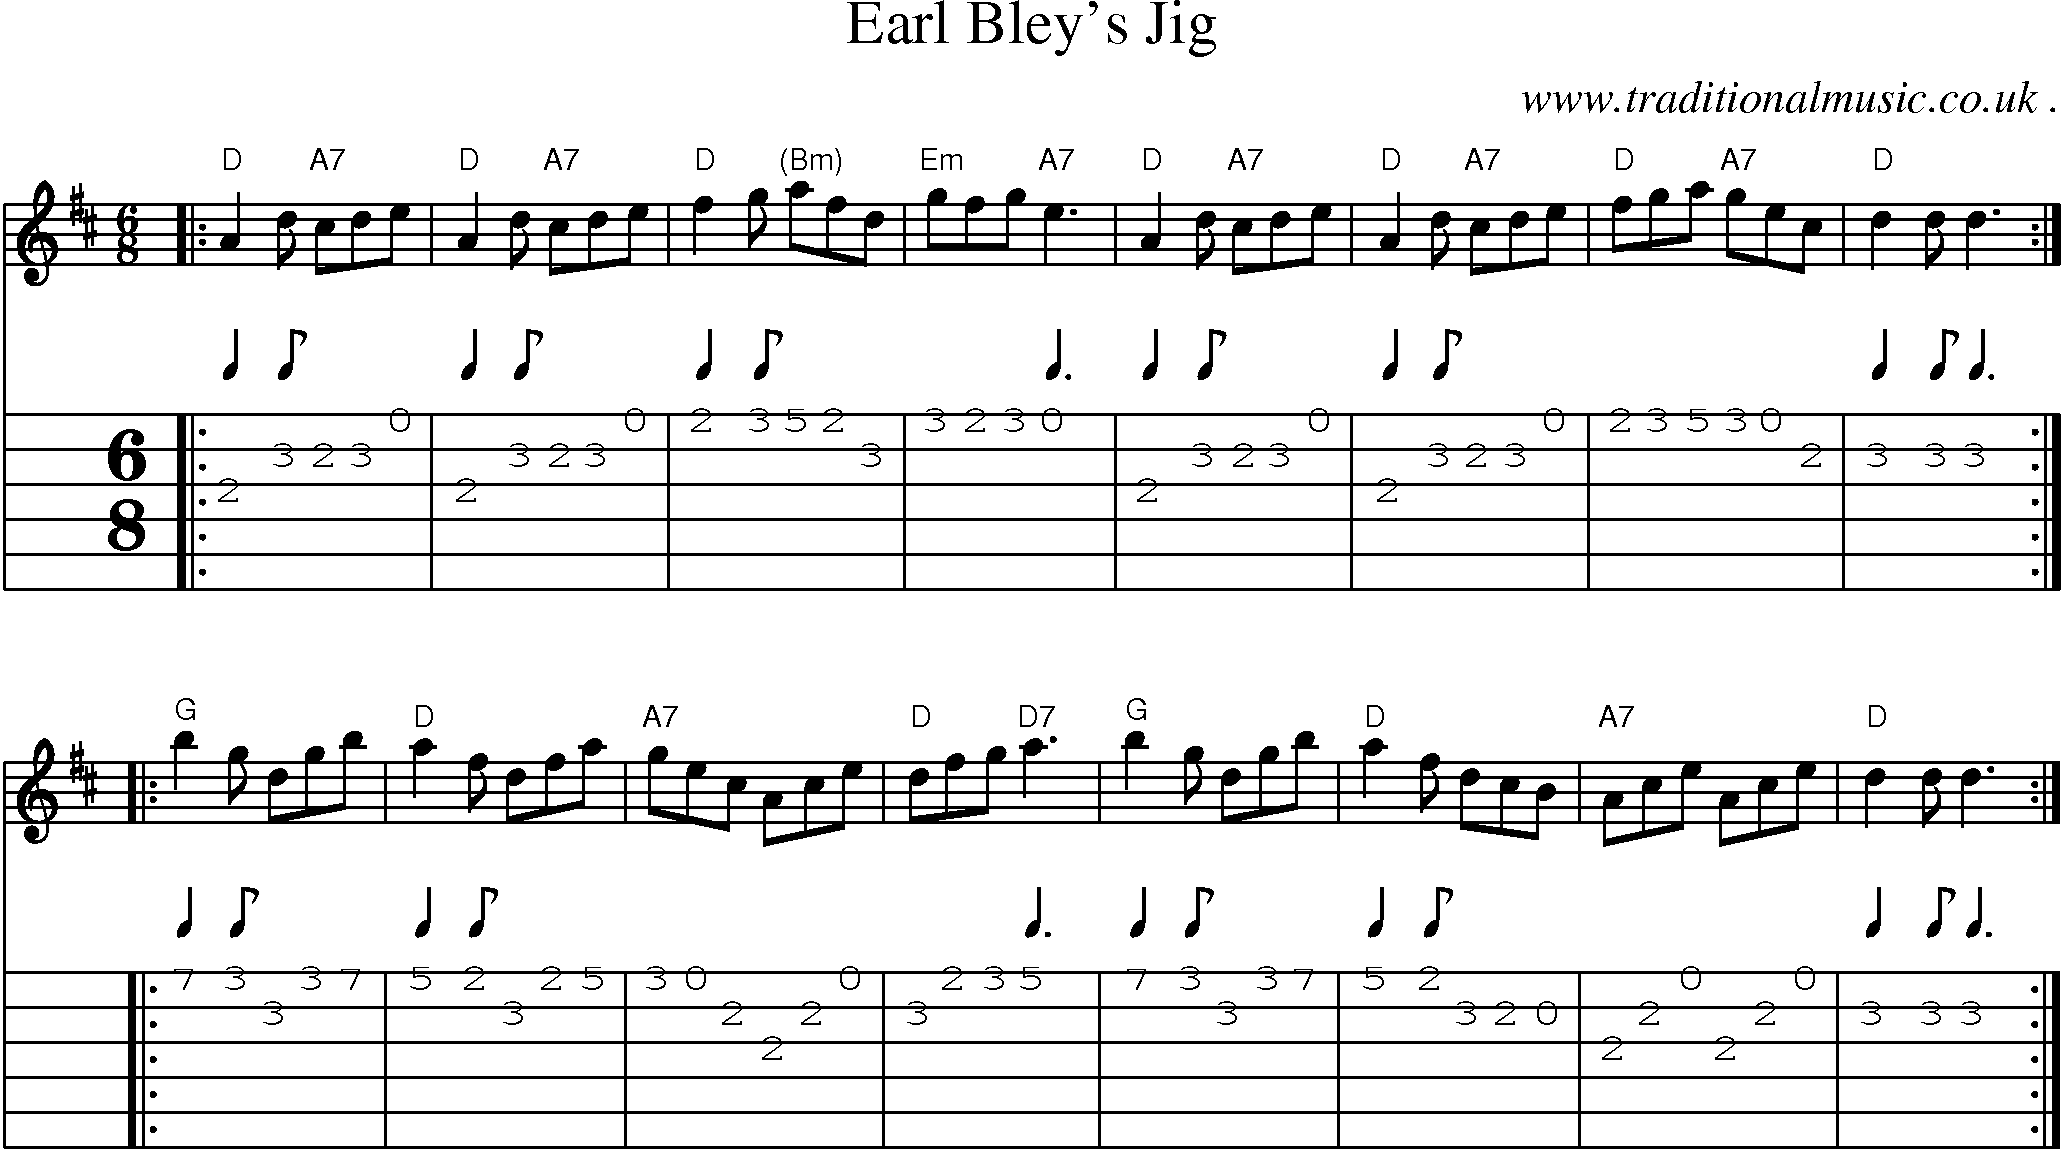 Sheet-music  score, Chords and Guitar Tabs for Earl Bleys Jig